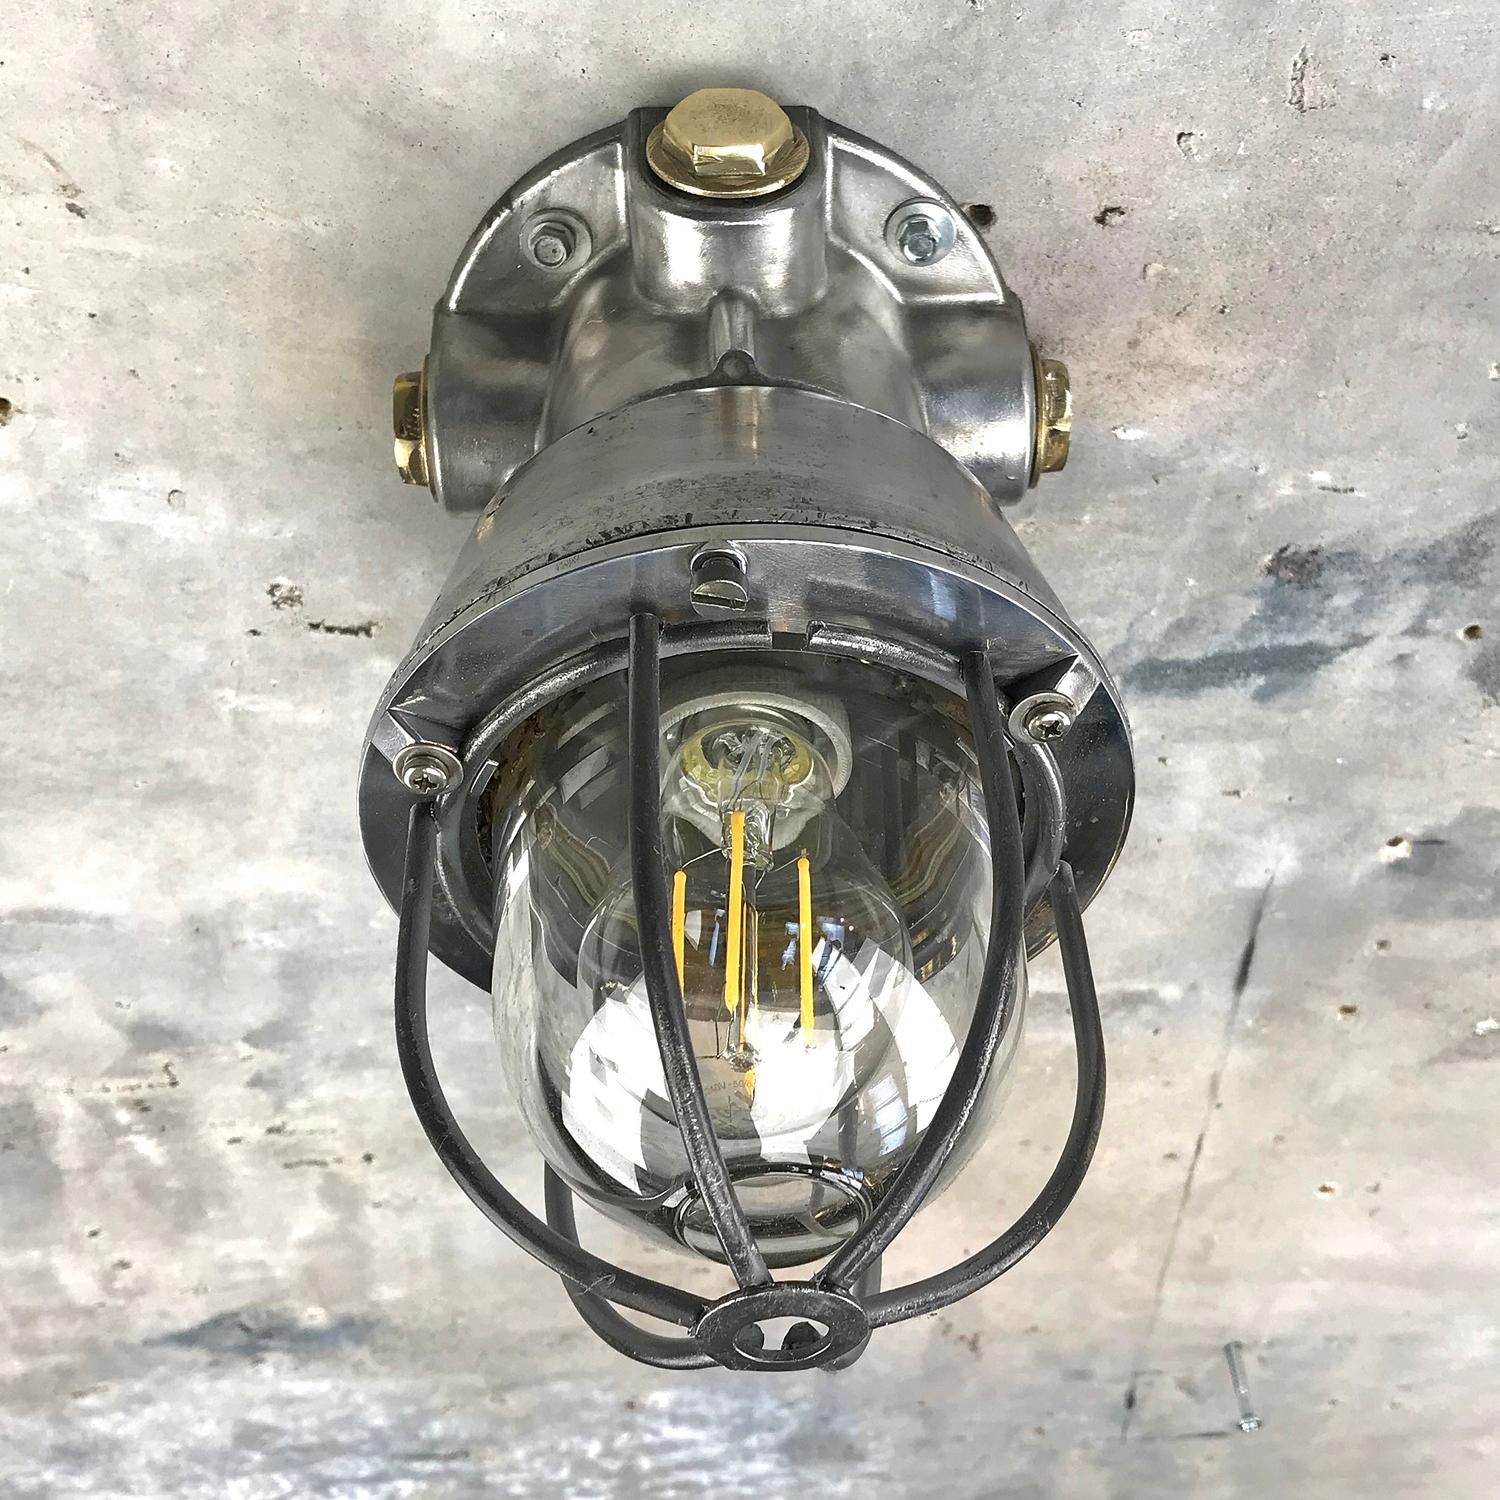 Italian explosion proof ceiling light
 
Made by Cortem a manufacturer of explosion proof electrical equipment these lights were specifically designed to light up hazardous areas within industrial settings, close to the operator and equipment.
